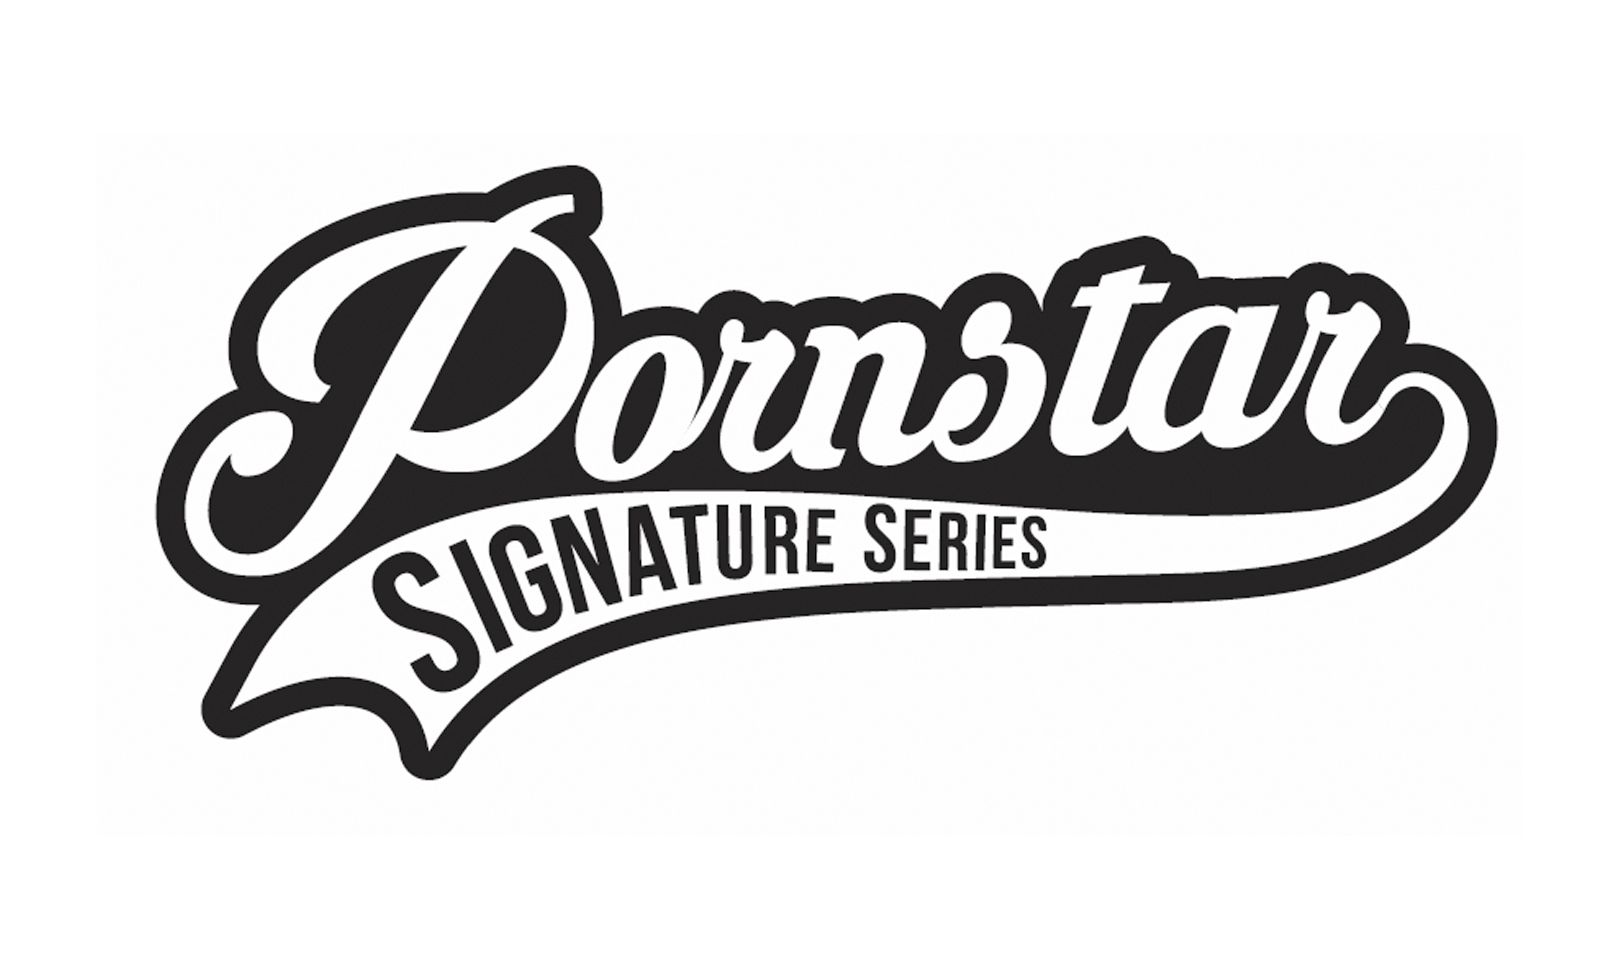 Pornstar Signature Series From The Cousins Group to Debut at AEE